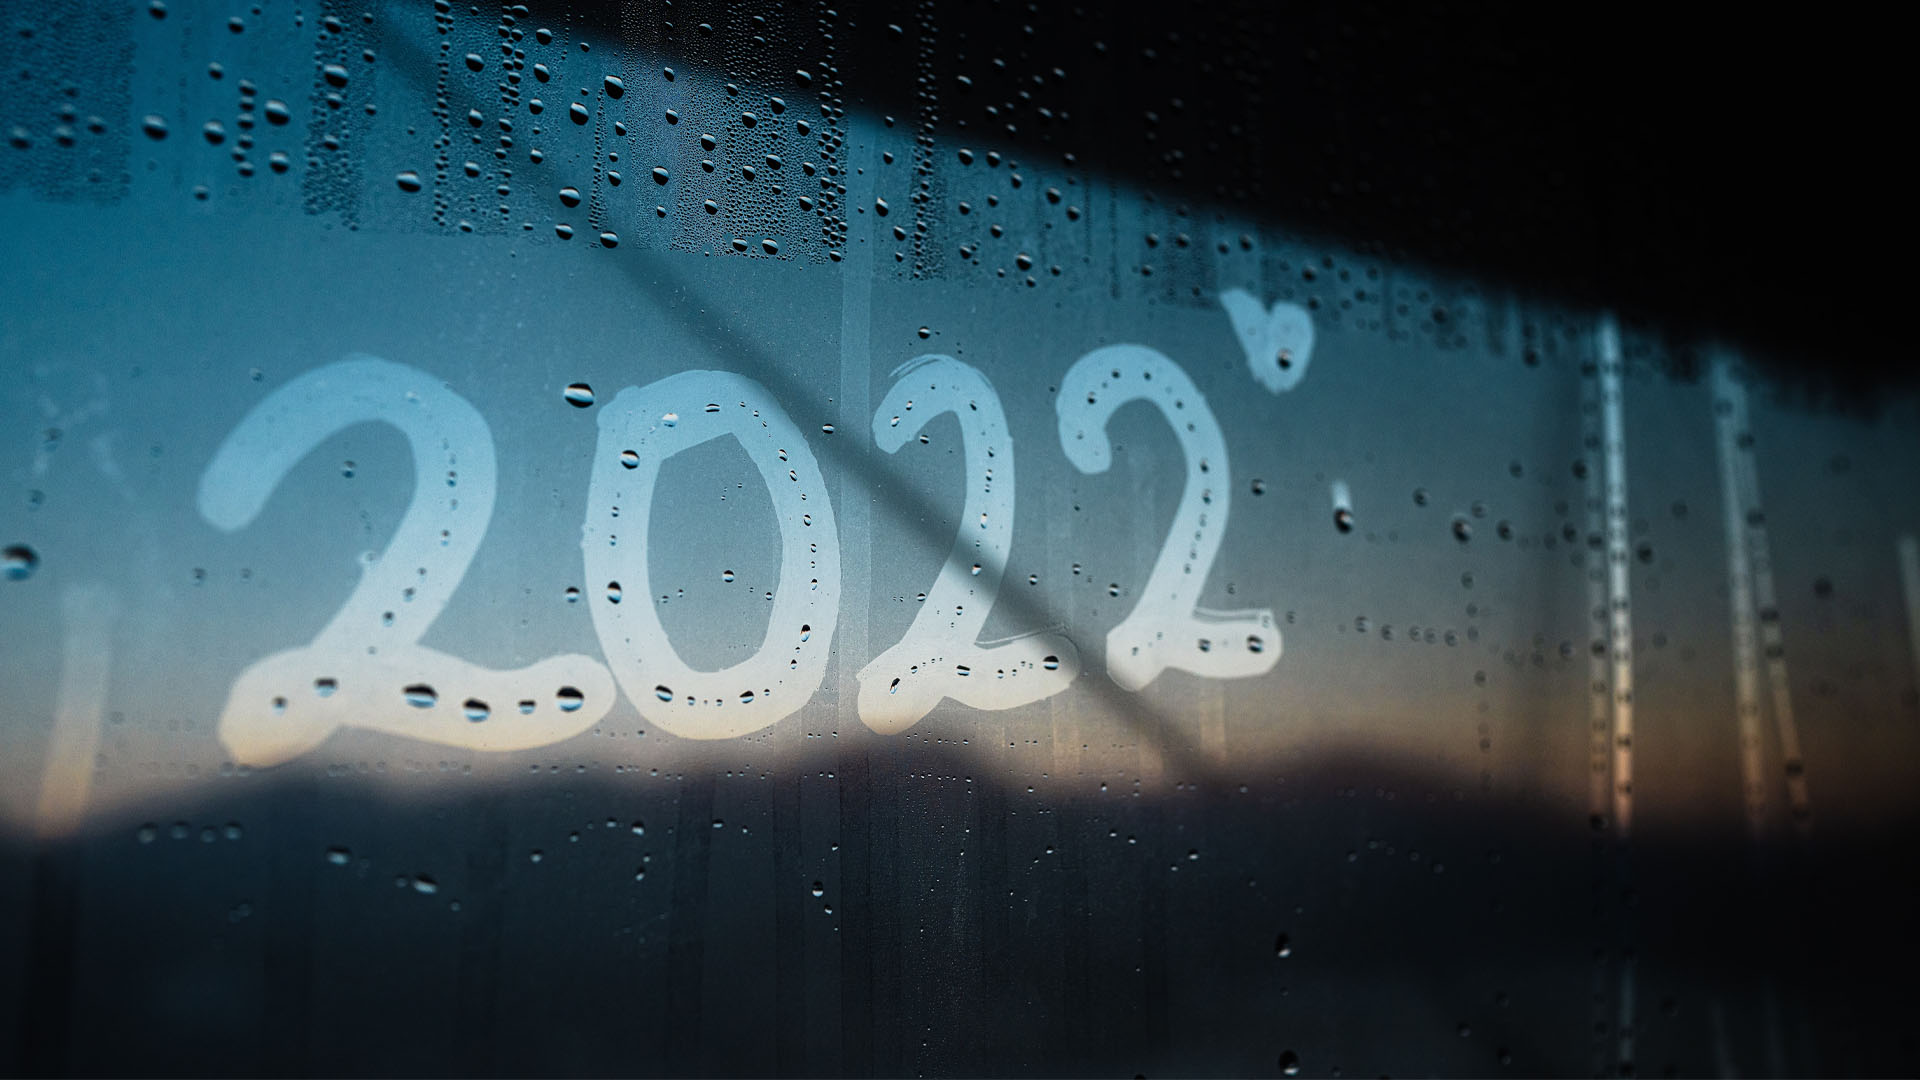 Photo of the year 2022 written on a window in condensation